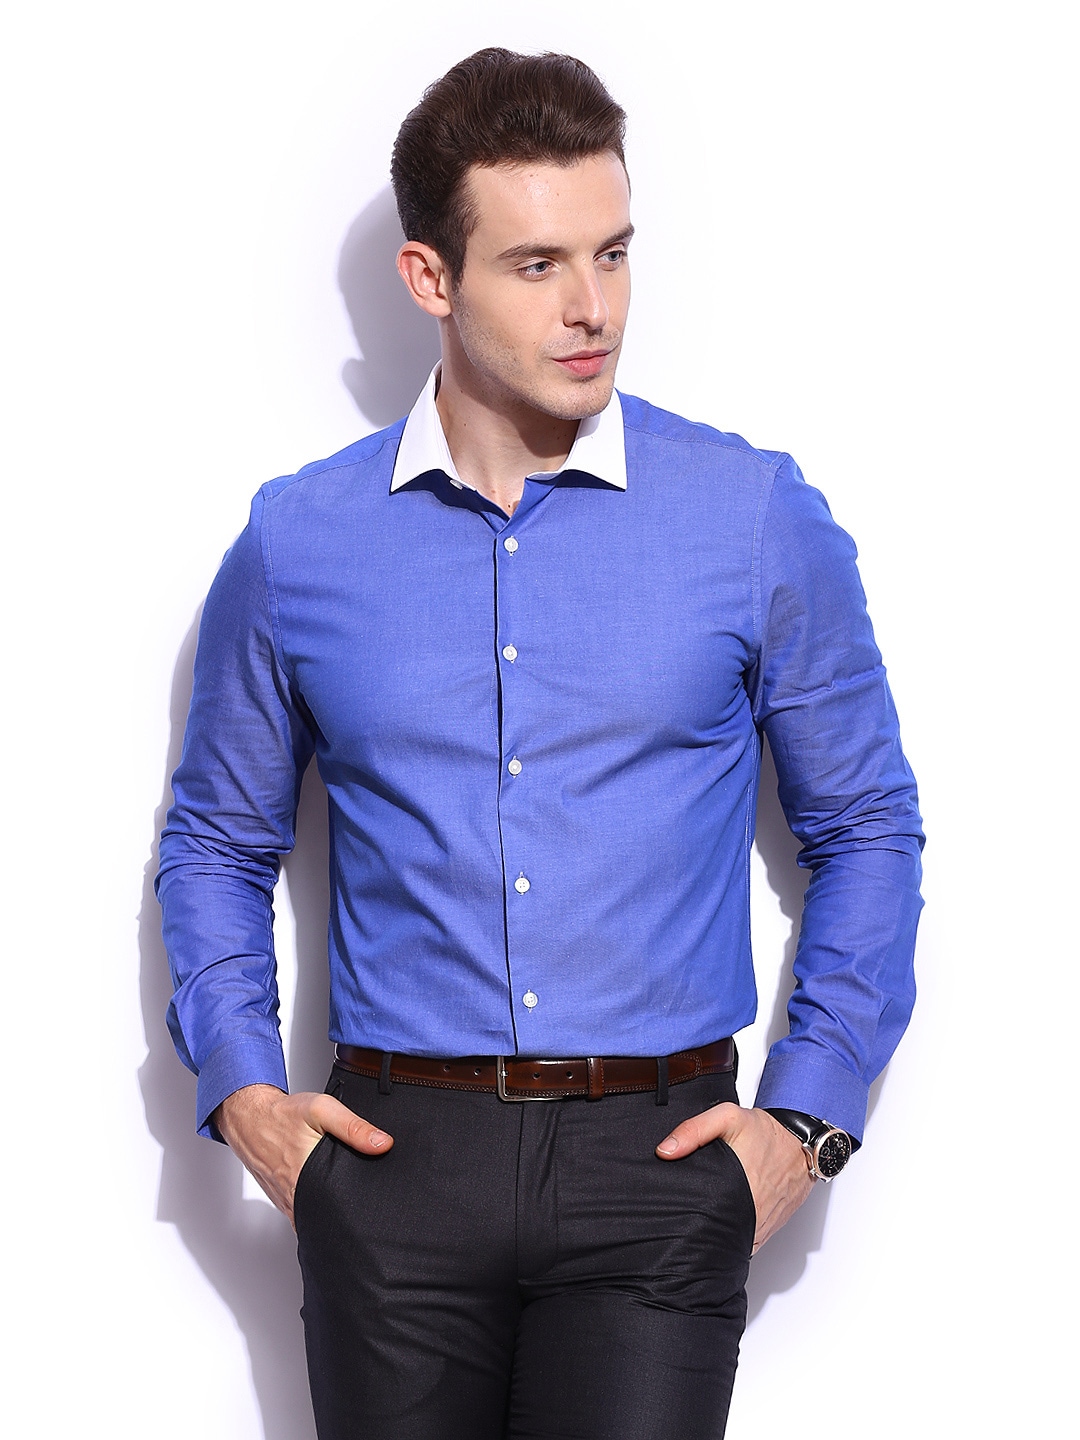 30 Best Formal Shirts for Men With Latest Brands & Designs | Styles At Life